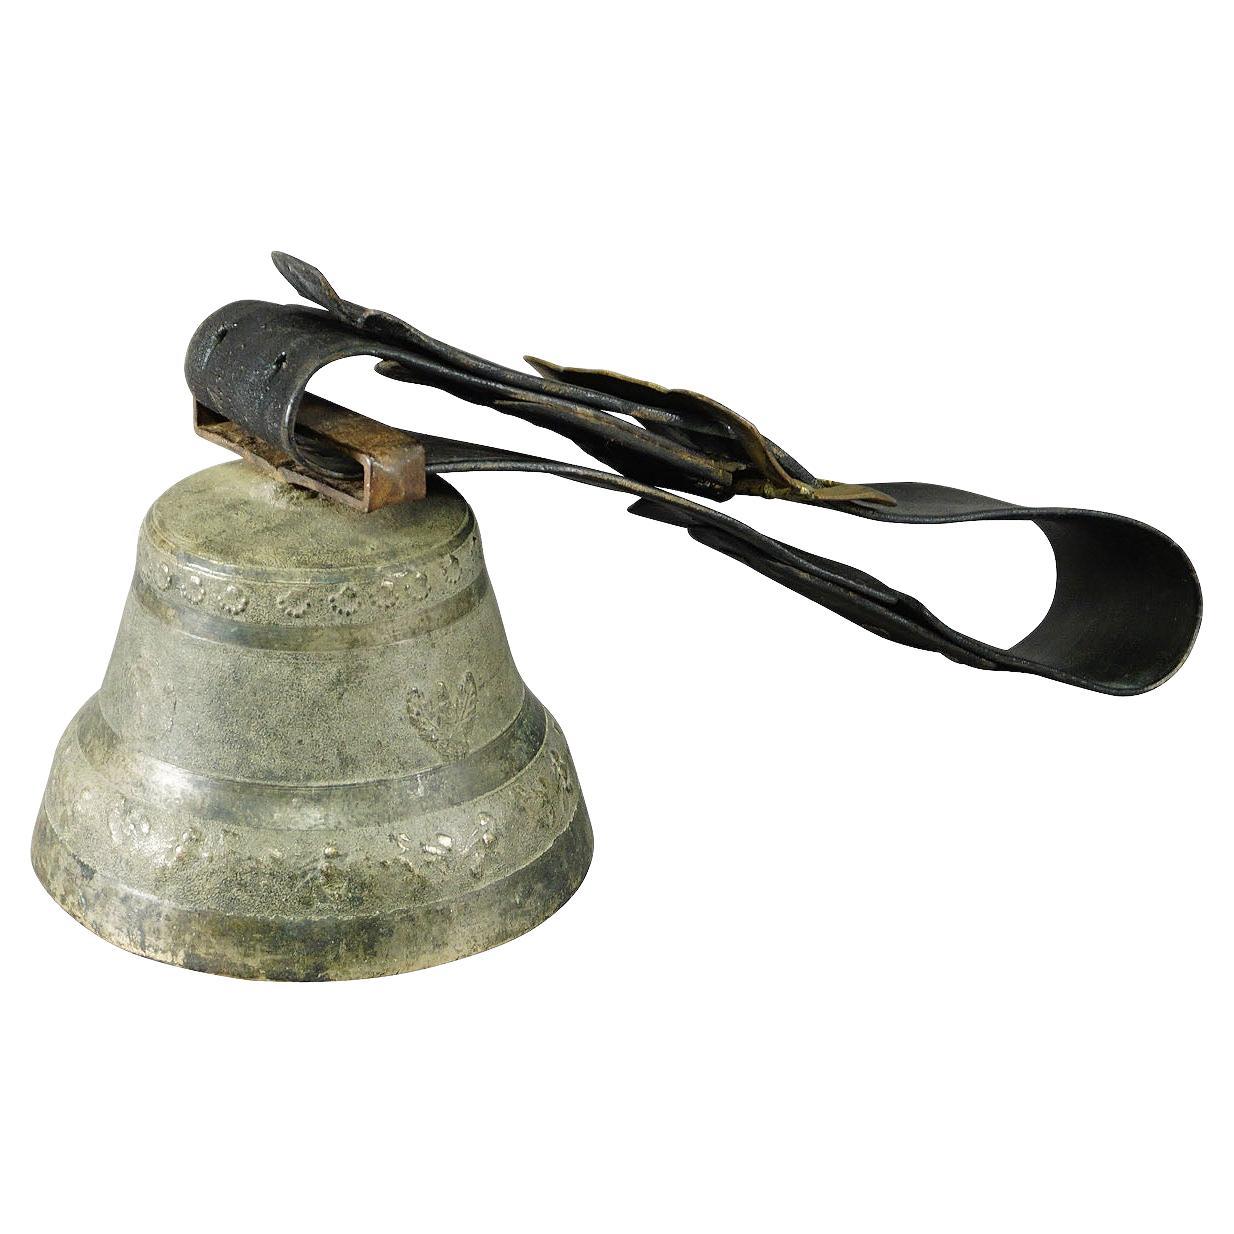 Antique Casted Bronze Cow Bell Made in Switzerland, ca. 1930